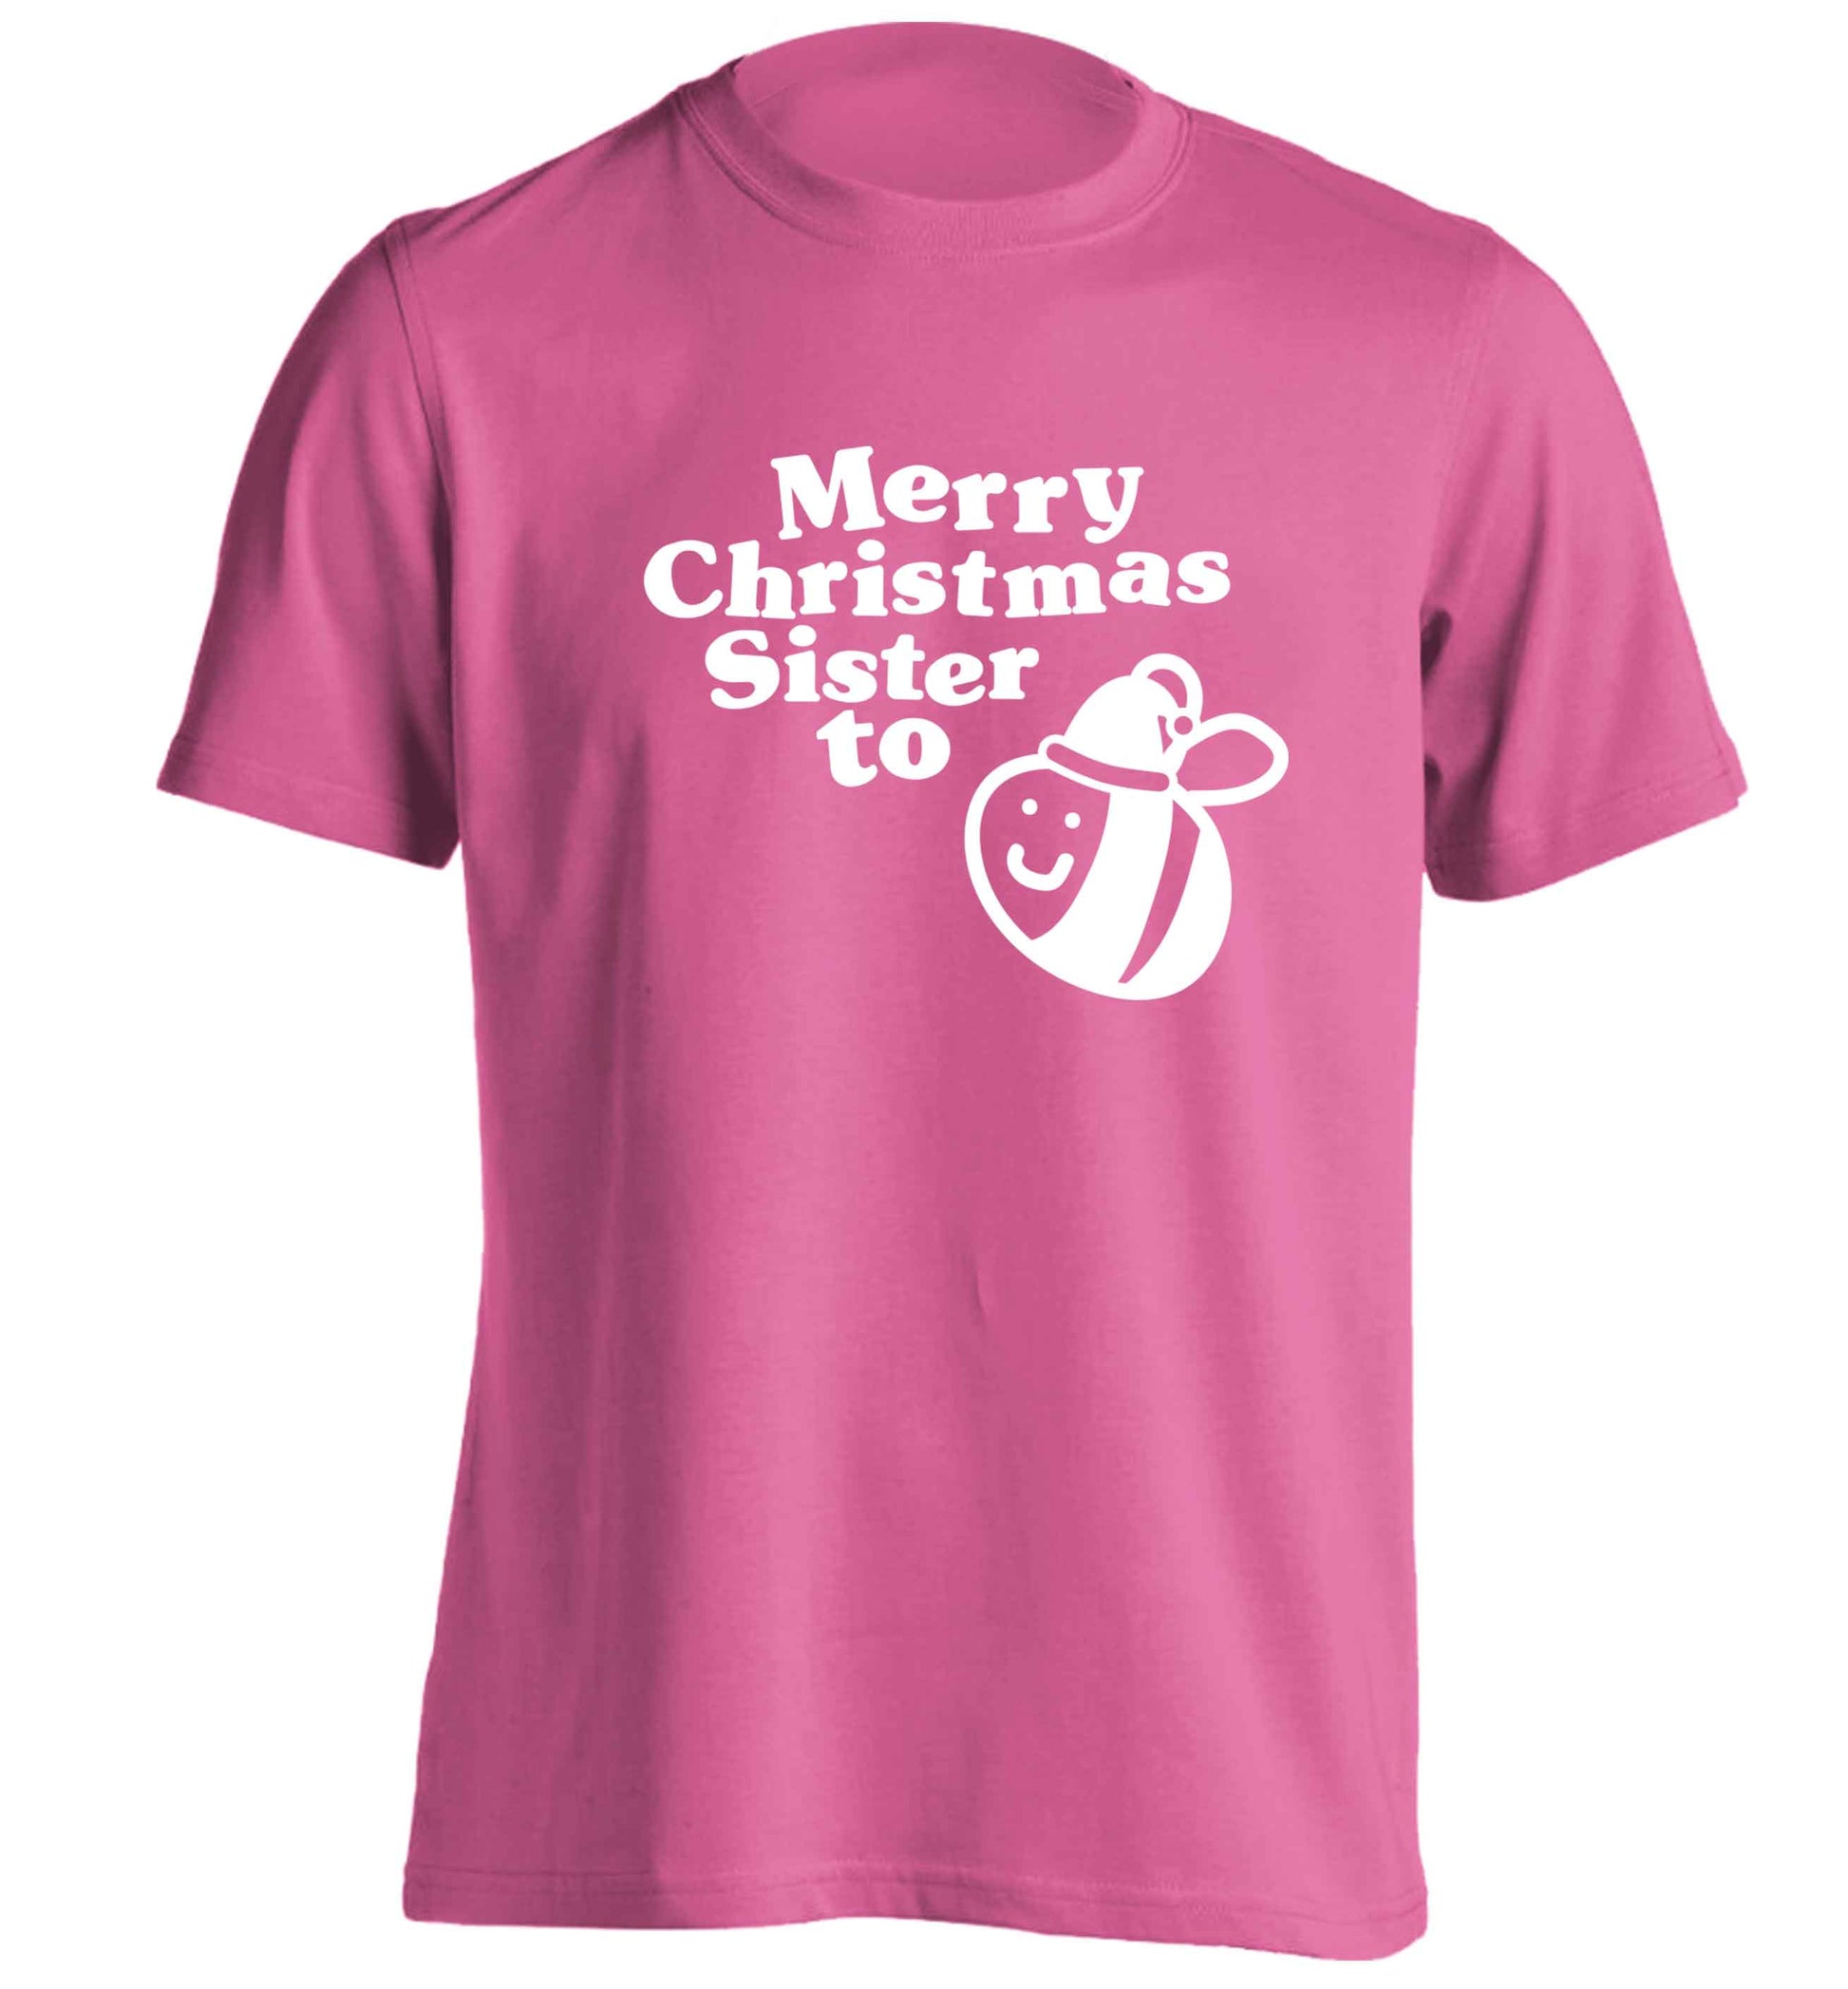 Merry Christmas sister to be adults unisex pink Tshirt 2XL